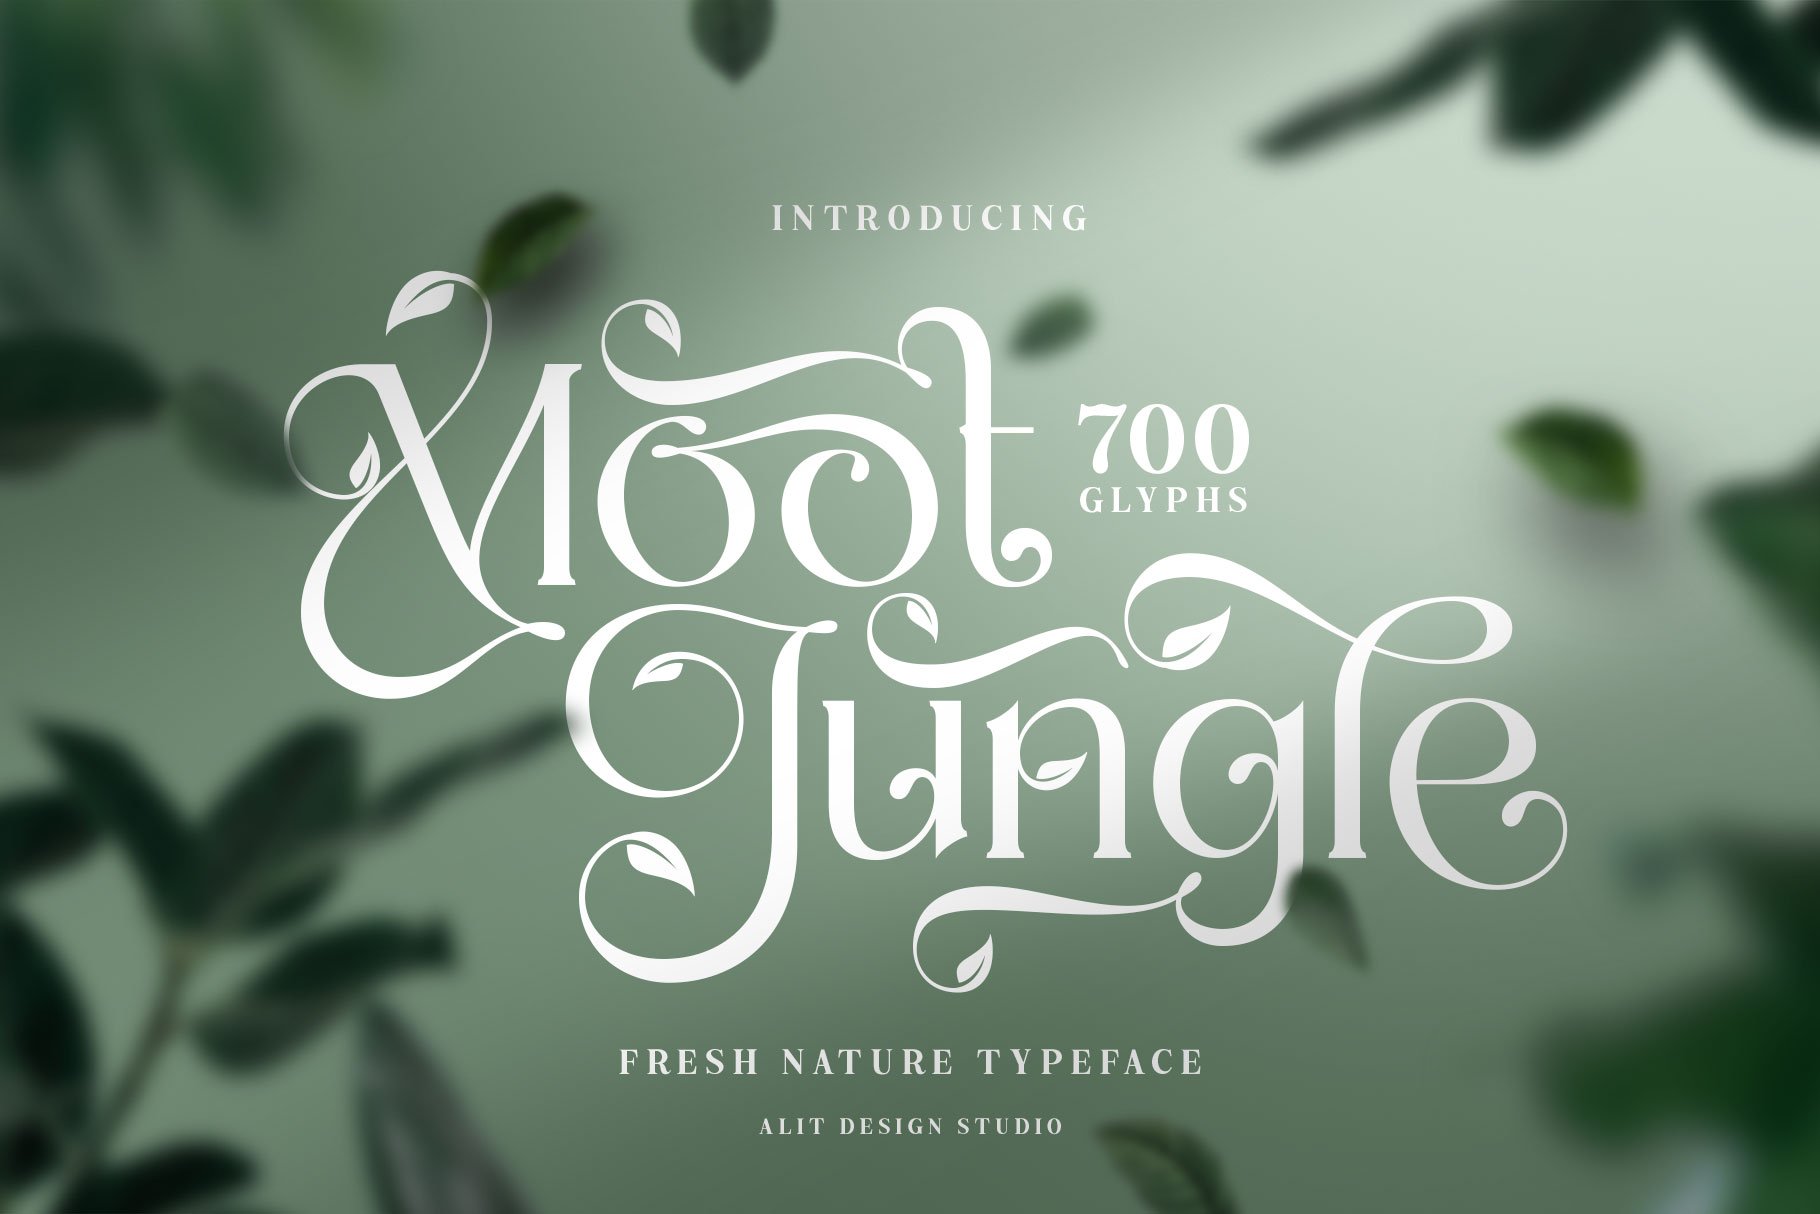 The Moot Jungle Nature Typeface cover image.